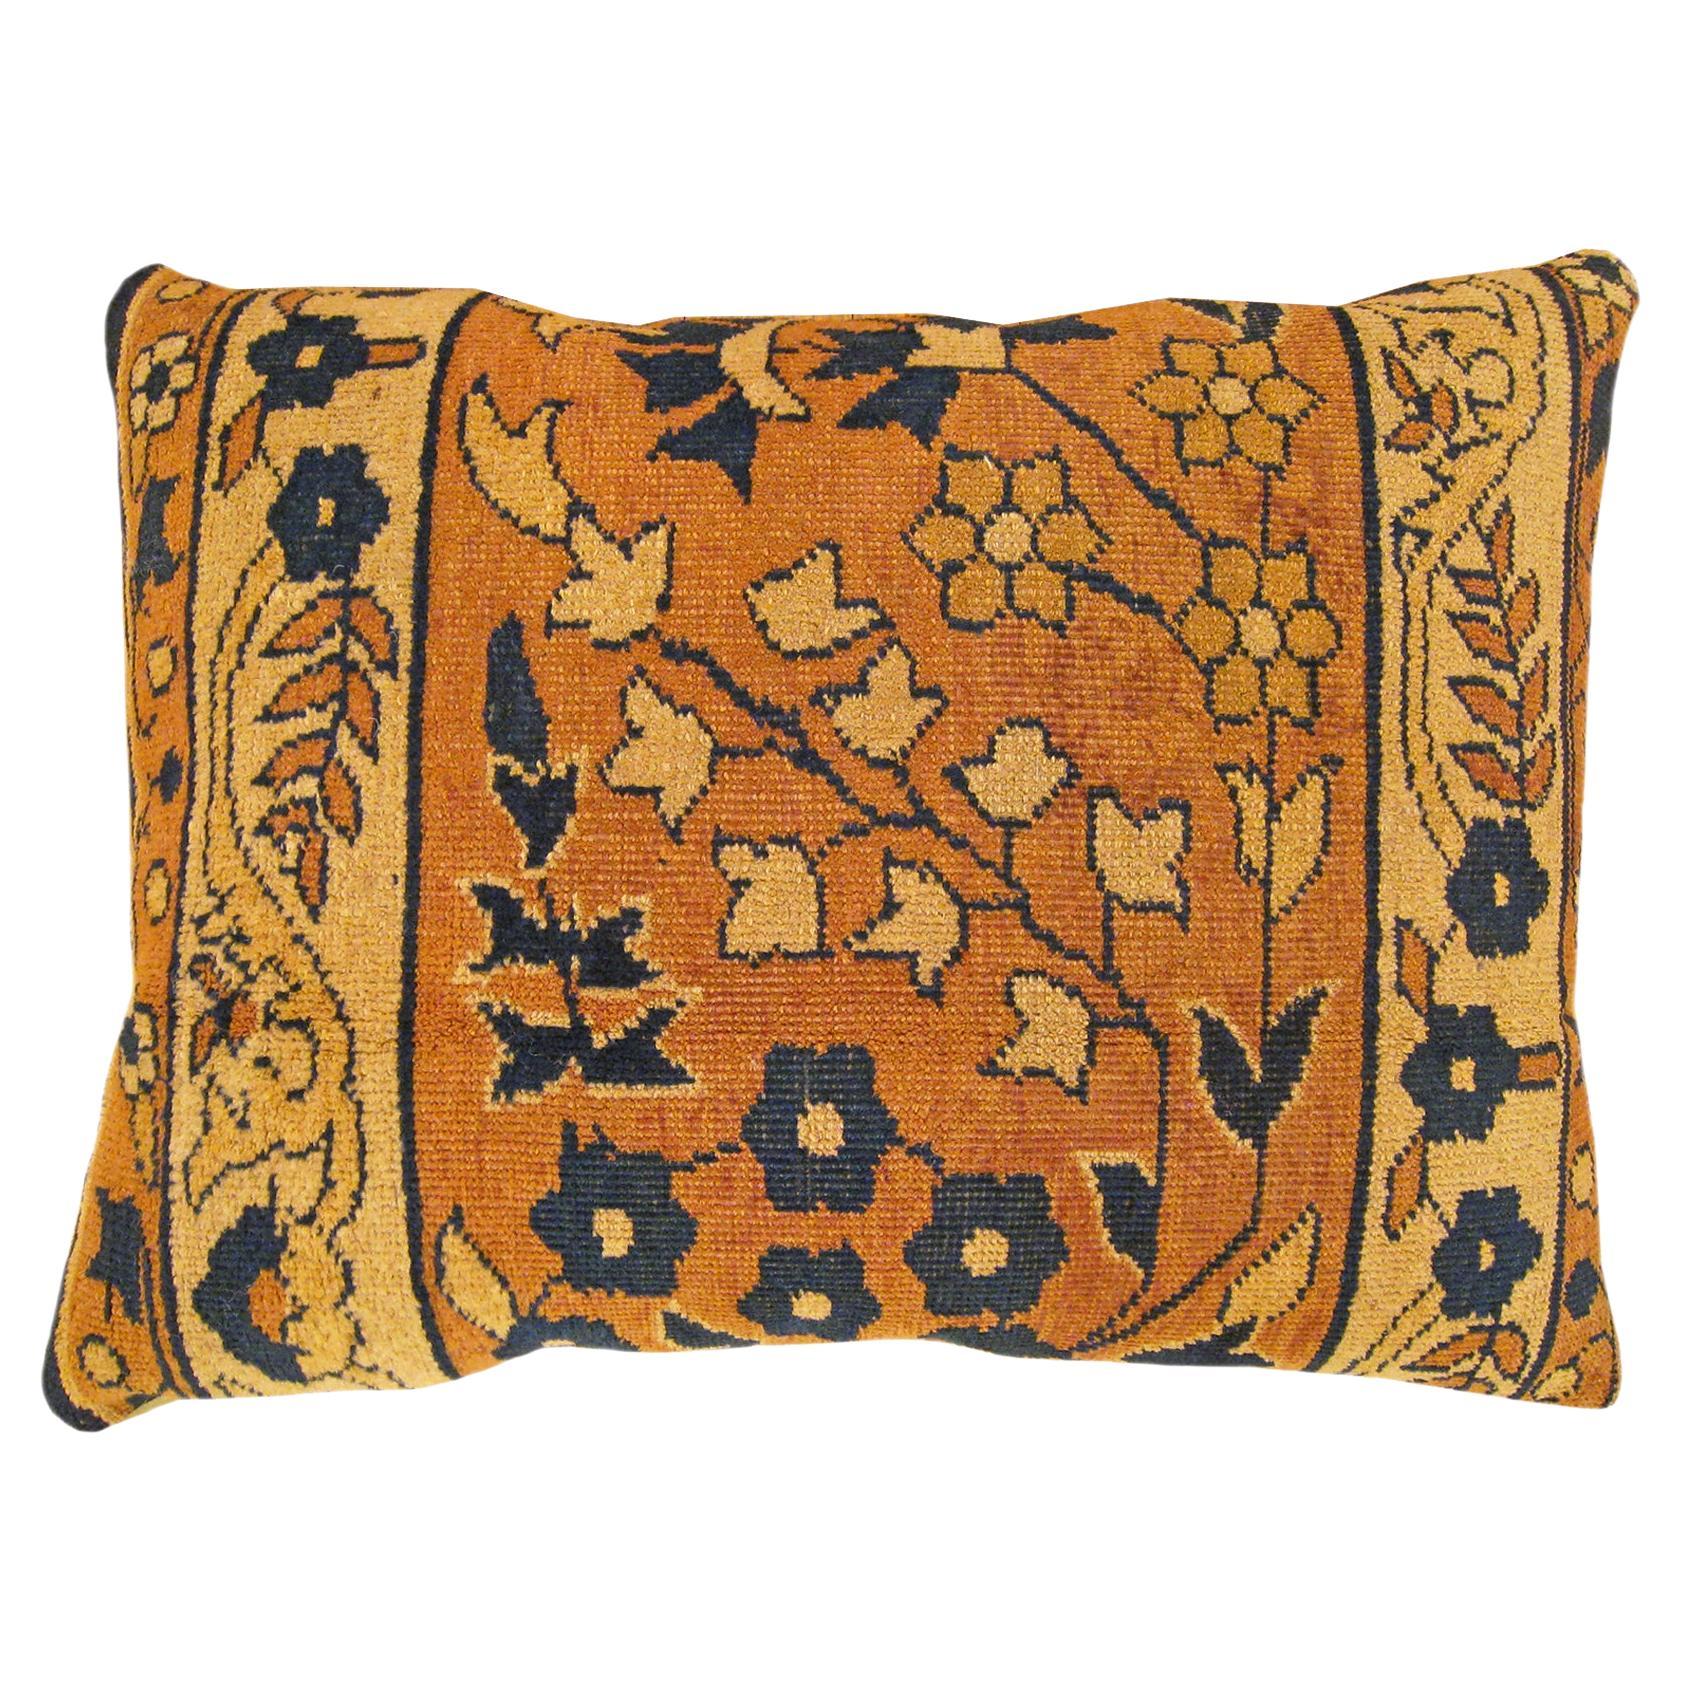  Decorative Antique Indian Agra Rug Pillow with Floral Elements Allover For Sale